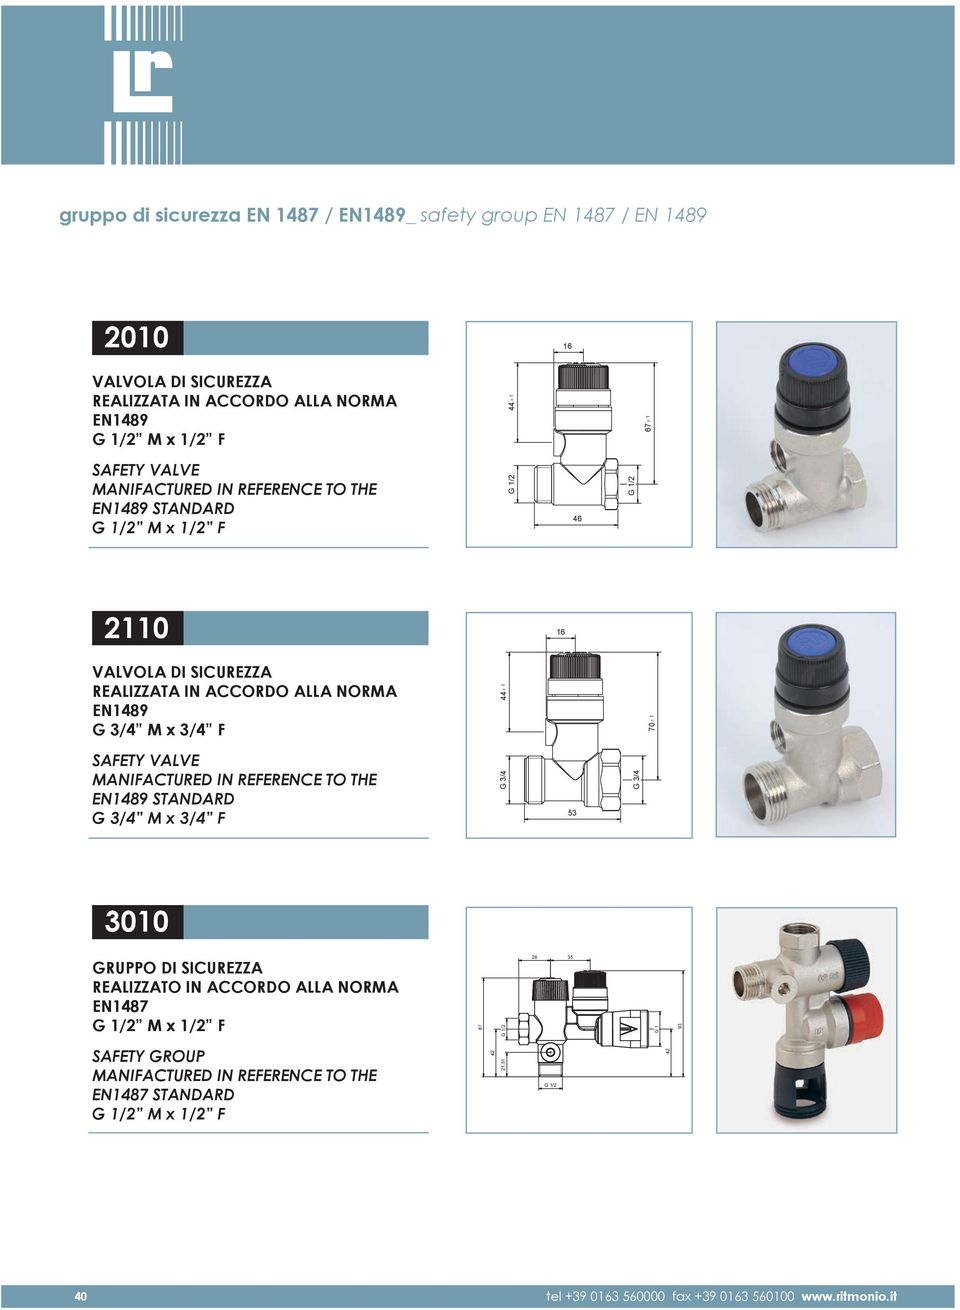 3/4 F 44 ± 1 70 ± 1 SAFETY VALVE MANIFACTURED IN REFERENCE TO THE EN1489 STANDARD M x 3/4 F 53 3010 GRUPPO DI SICUREZZA REALIZZATO IN